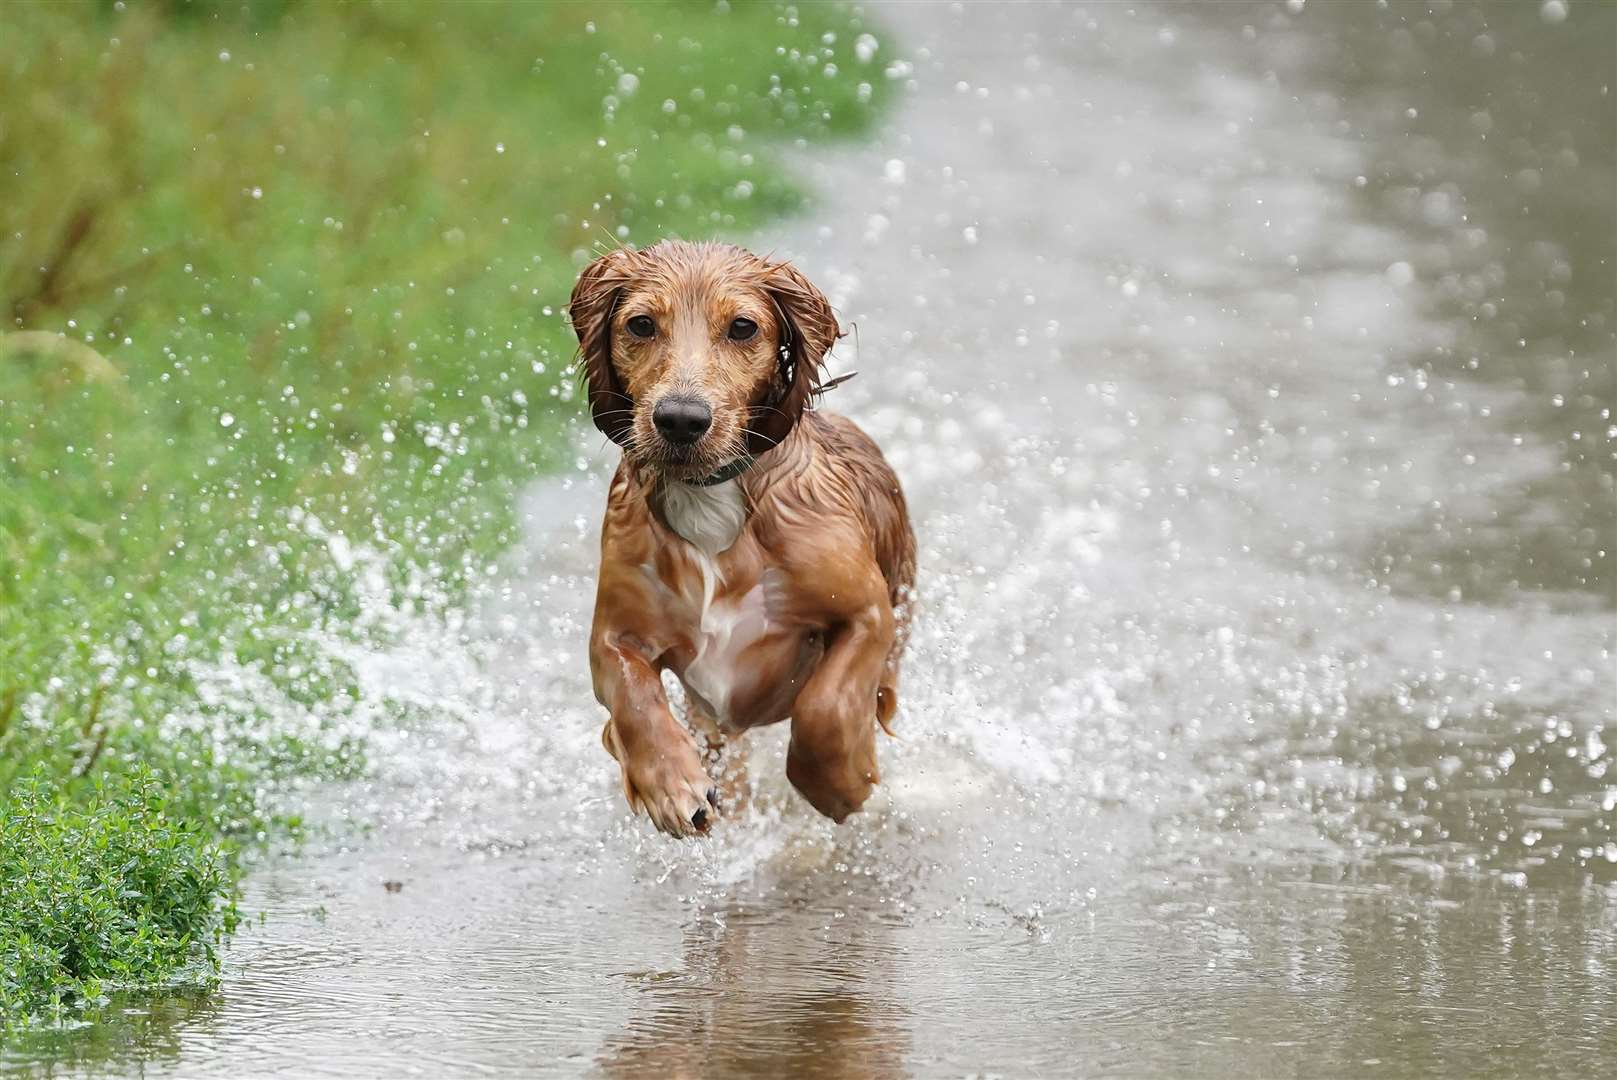 Hunter, a long haired dachshund, enjoyed the puddles at the Ingrebourne Valley Nature Reserve in Rainham (Ian West/PA)